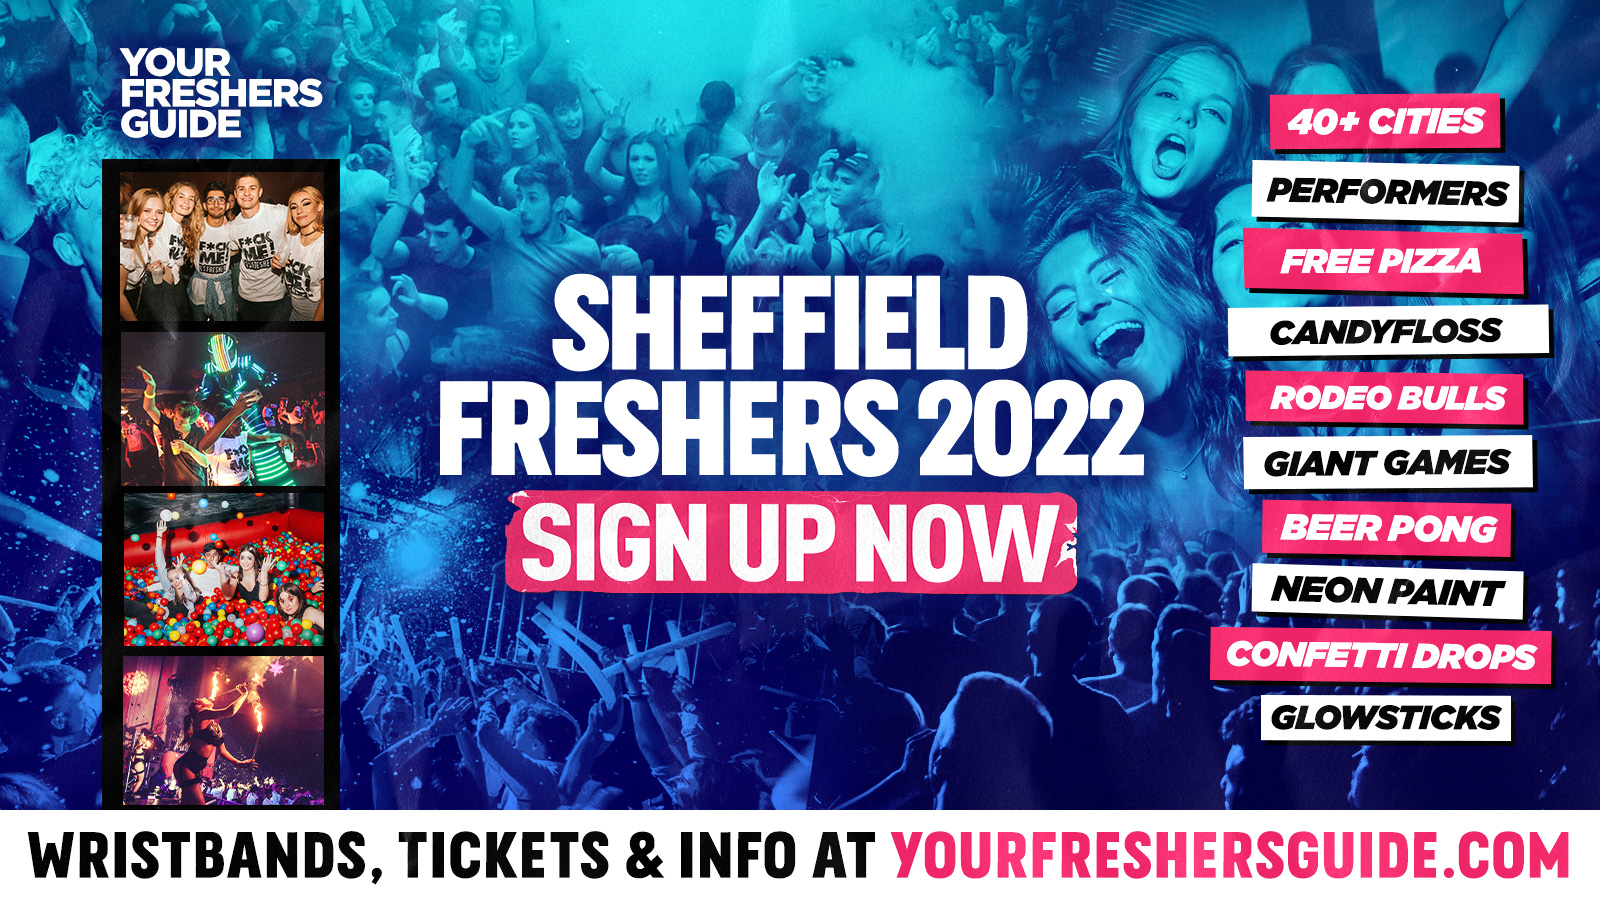 Sheffield Freshers 2022 FREE SIGN UP! The BIGGEST Events at